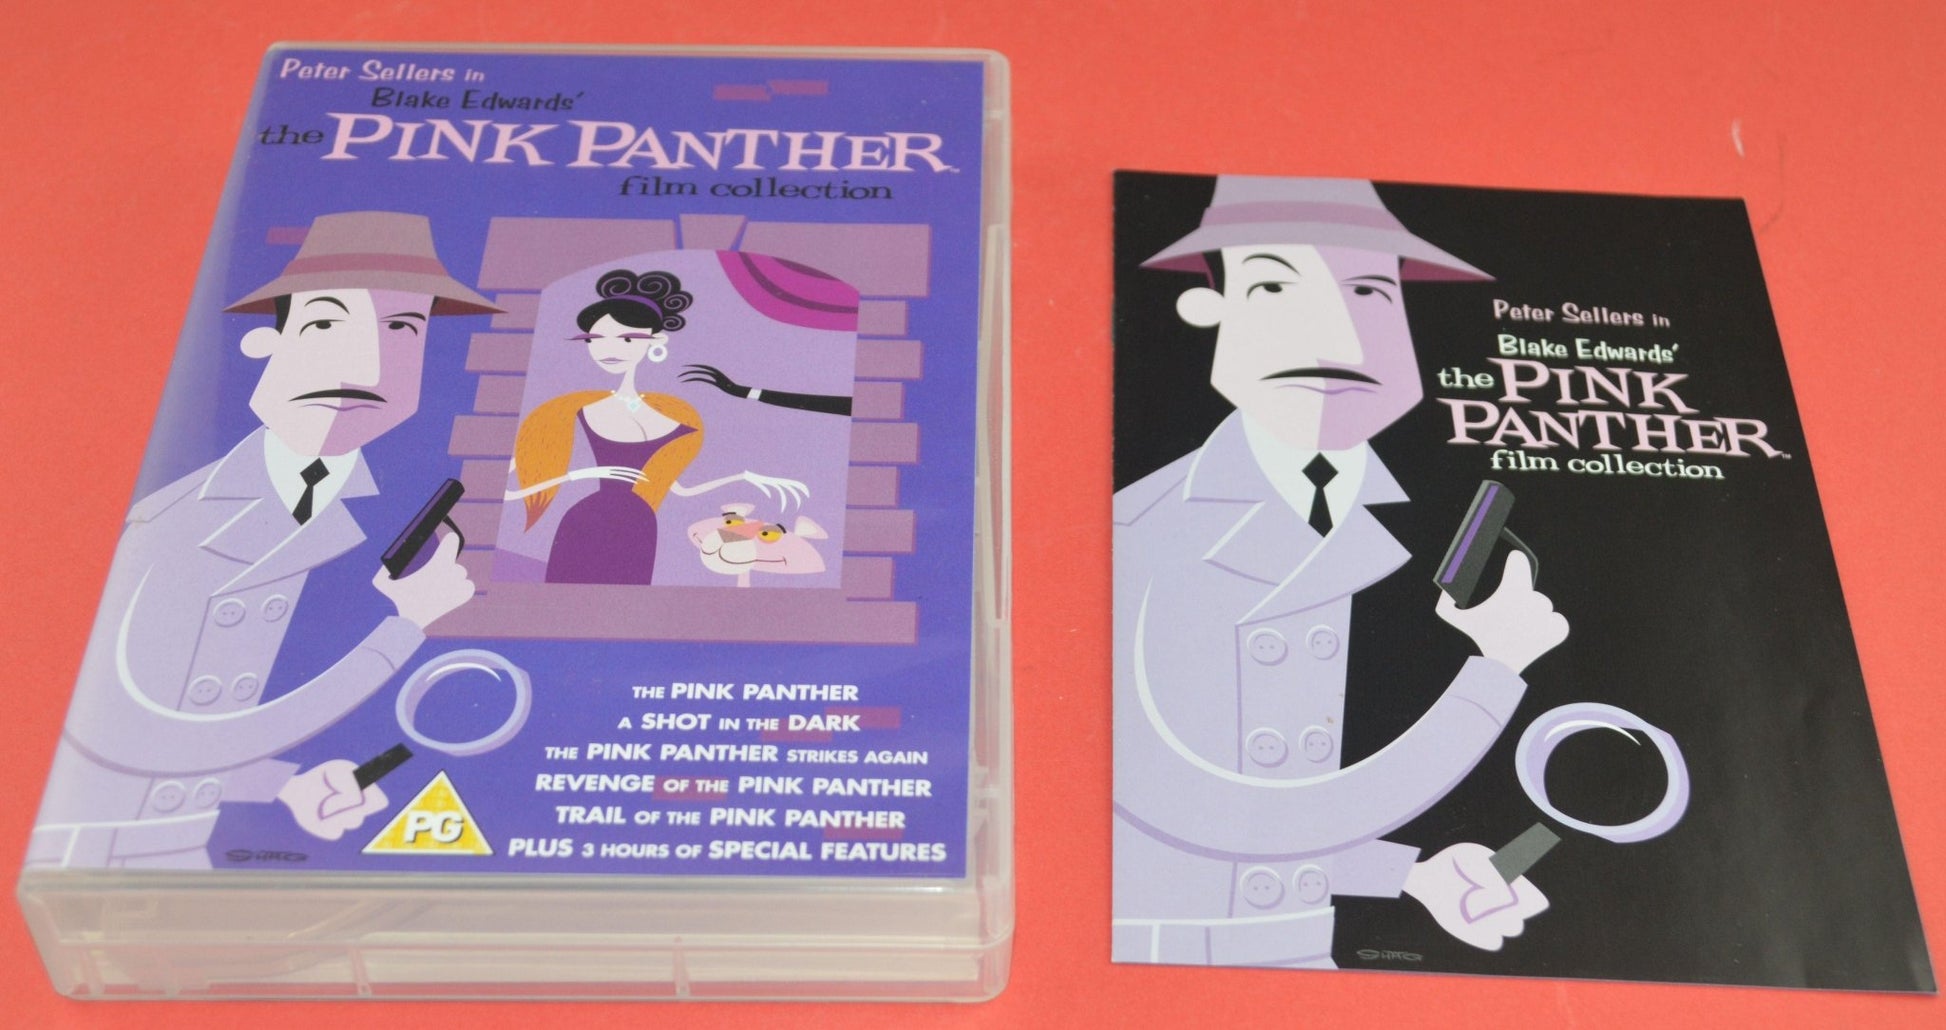 DVD BOX SET PINK PANTHER FILM COLLECTION(PREVIOUSLY OWNED) GOOD CONDITION - TMD167207